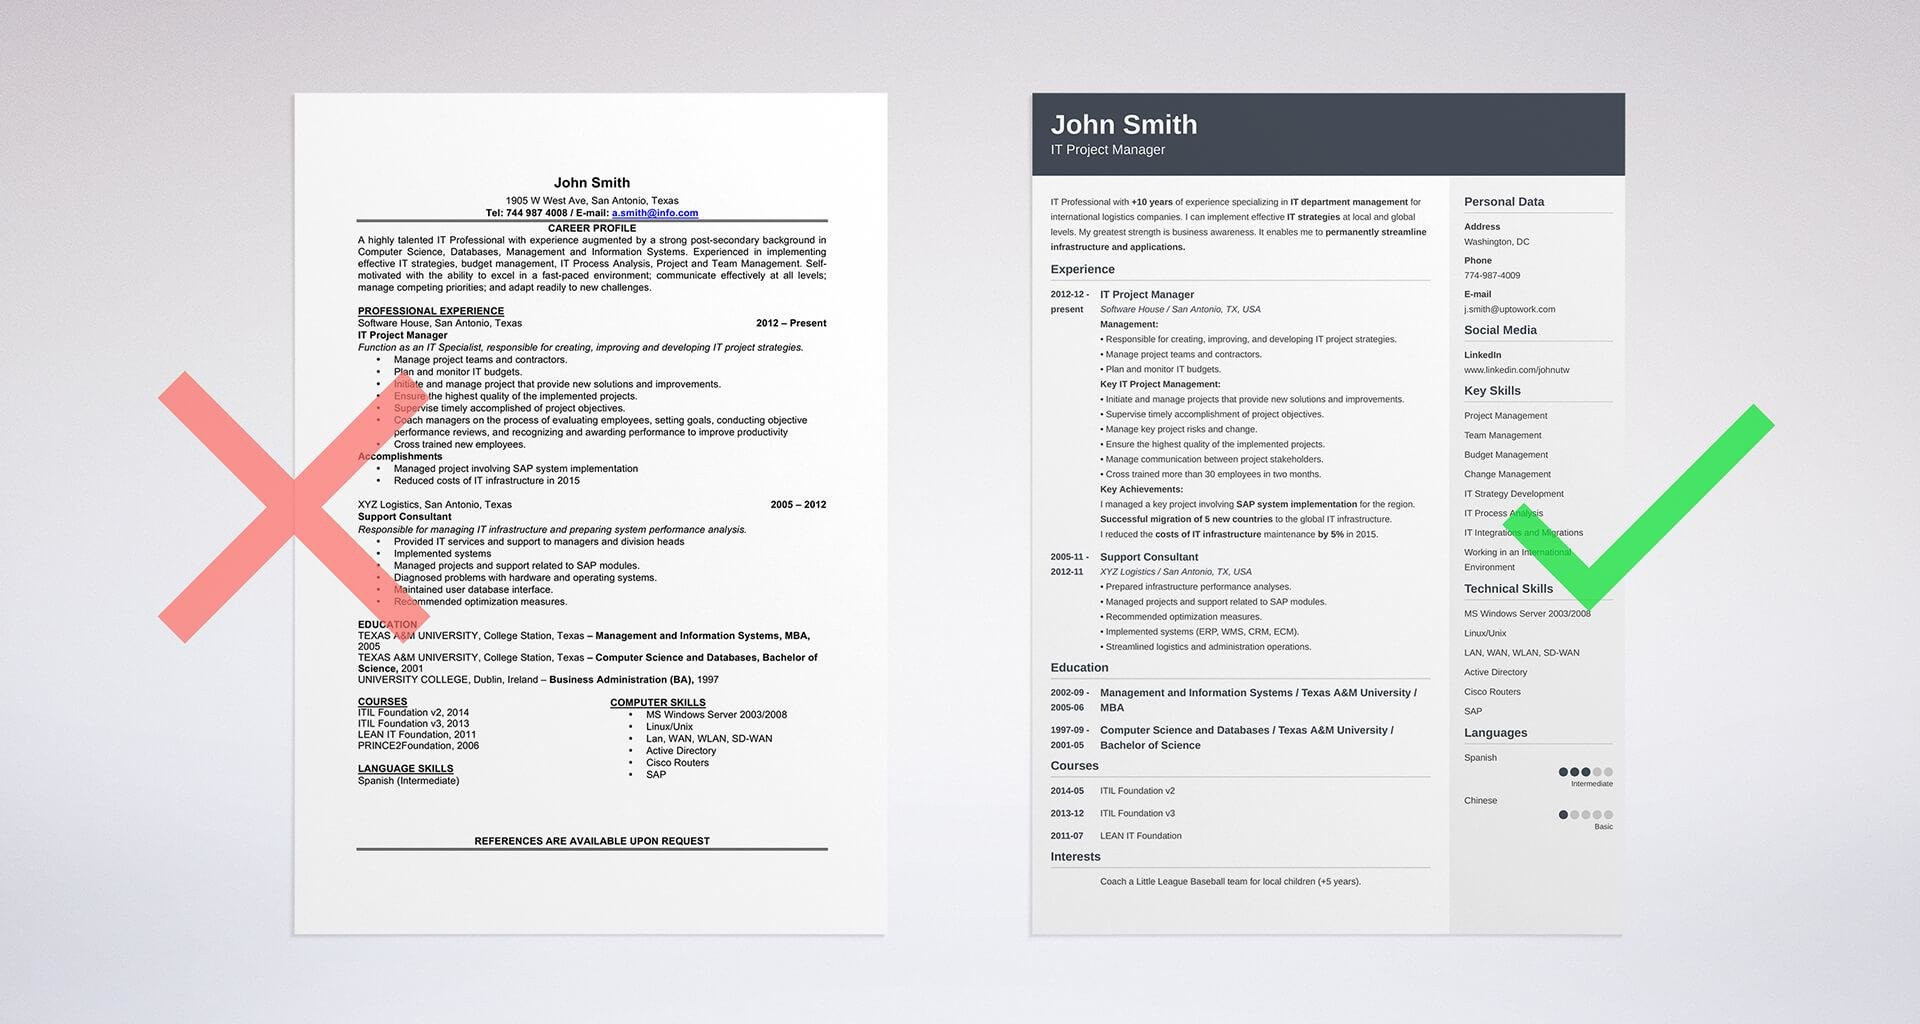 Sample Resume with Only High School Education How to List Education On A Resume: Section Examples & Tips